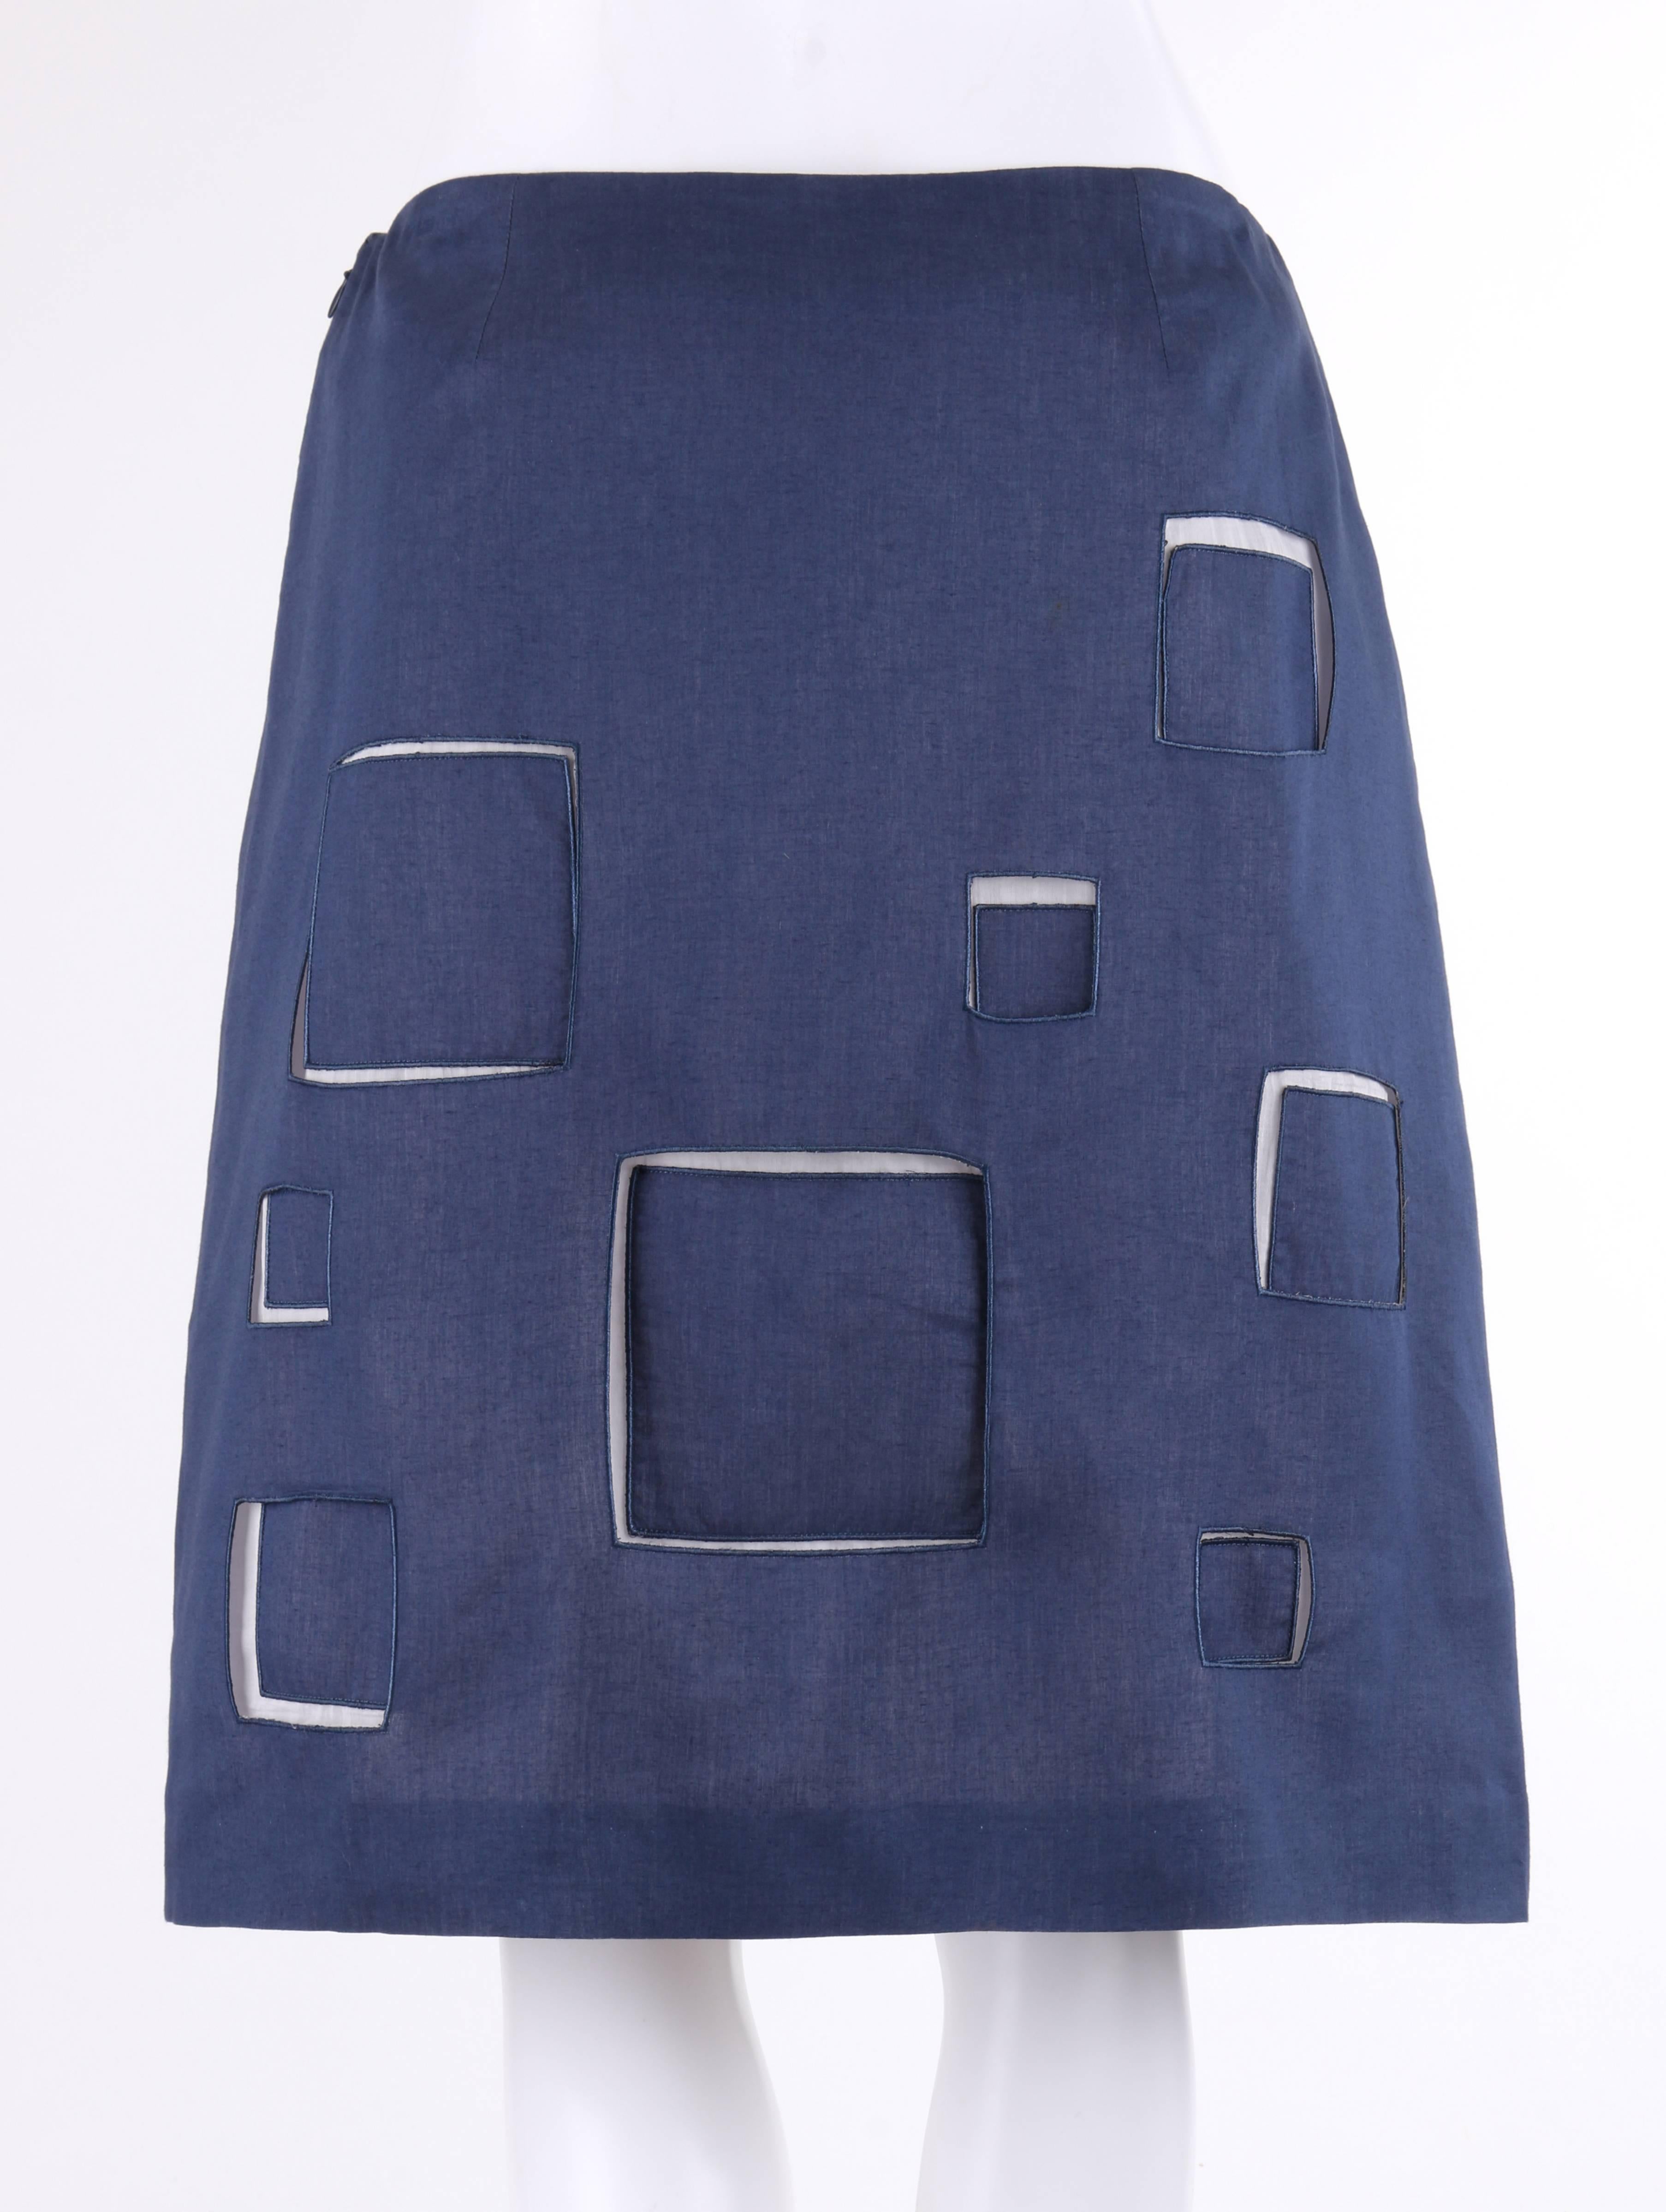 Women's GIVENCHY Couture A/W 1998 ALEXANDER McQUEEN Blue Cotton Square Cut Work Skirt